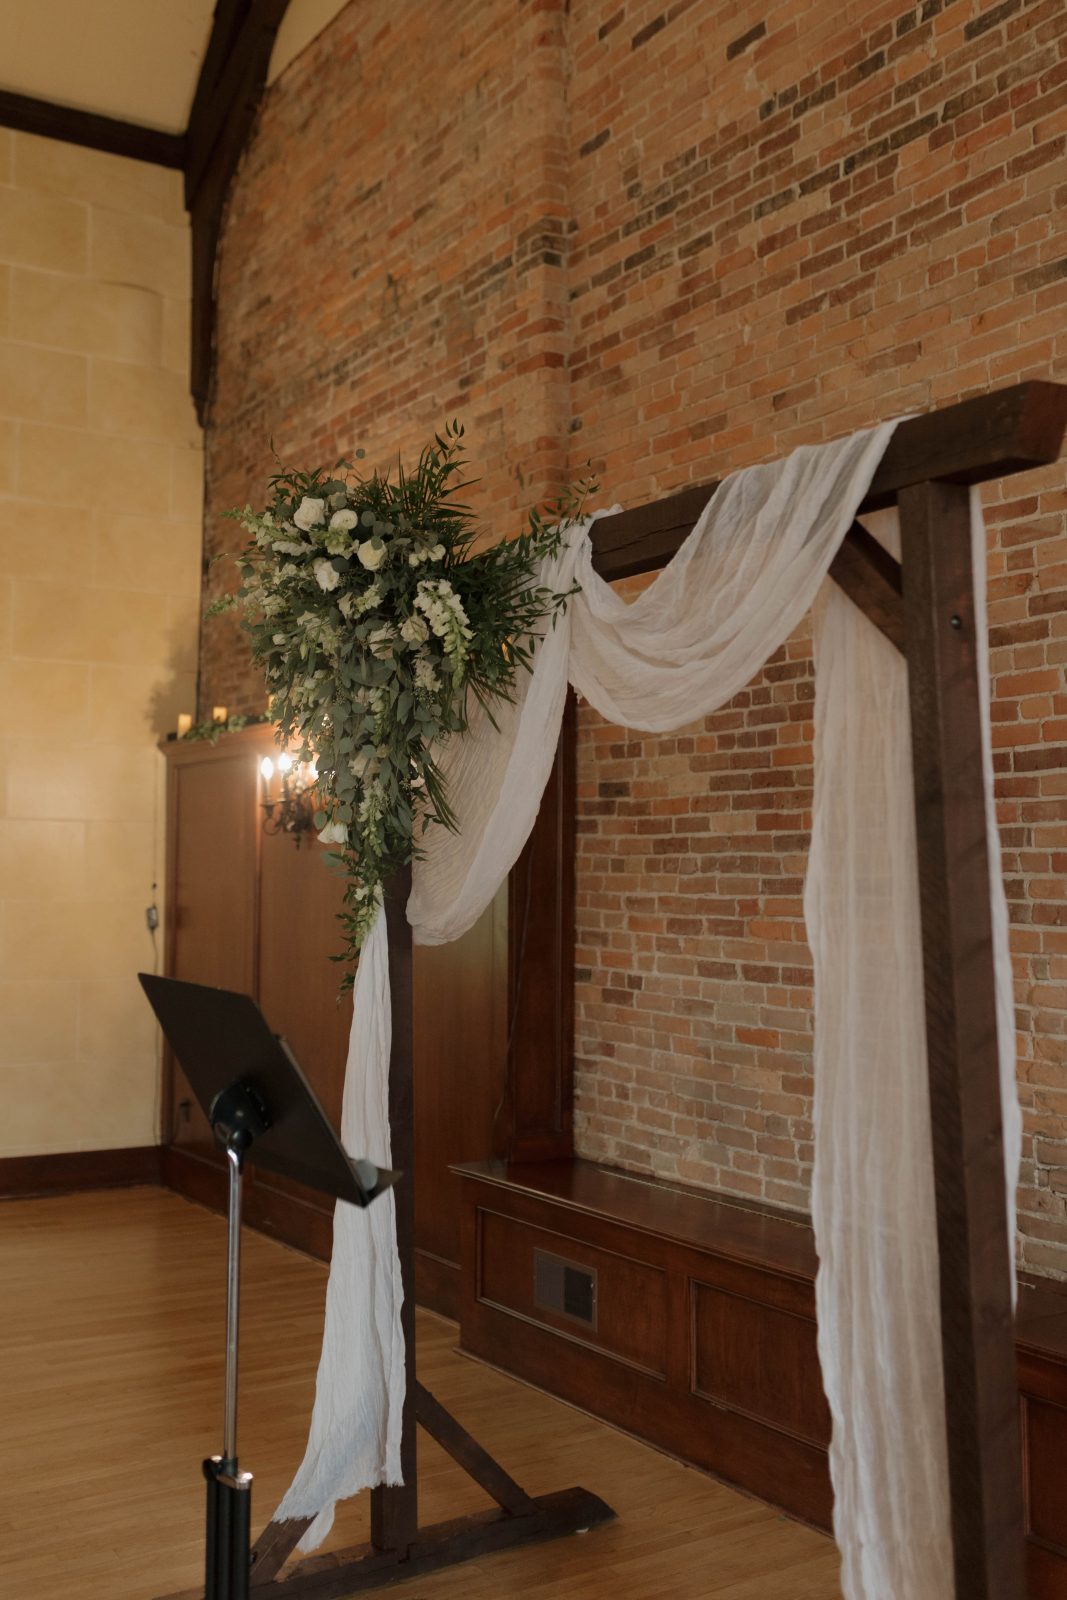 Wedding arch at the point - a private event venue belonging to the springside inn